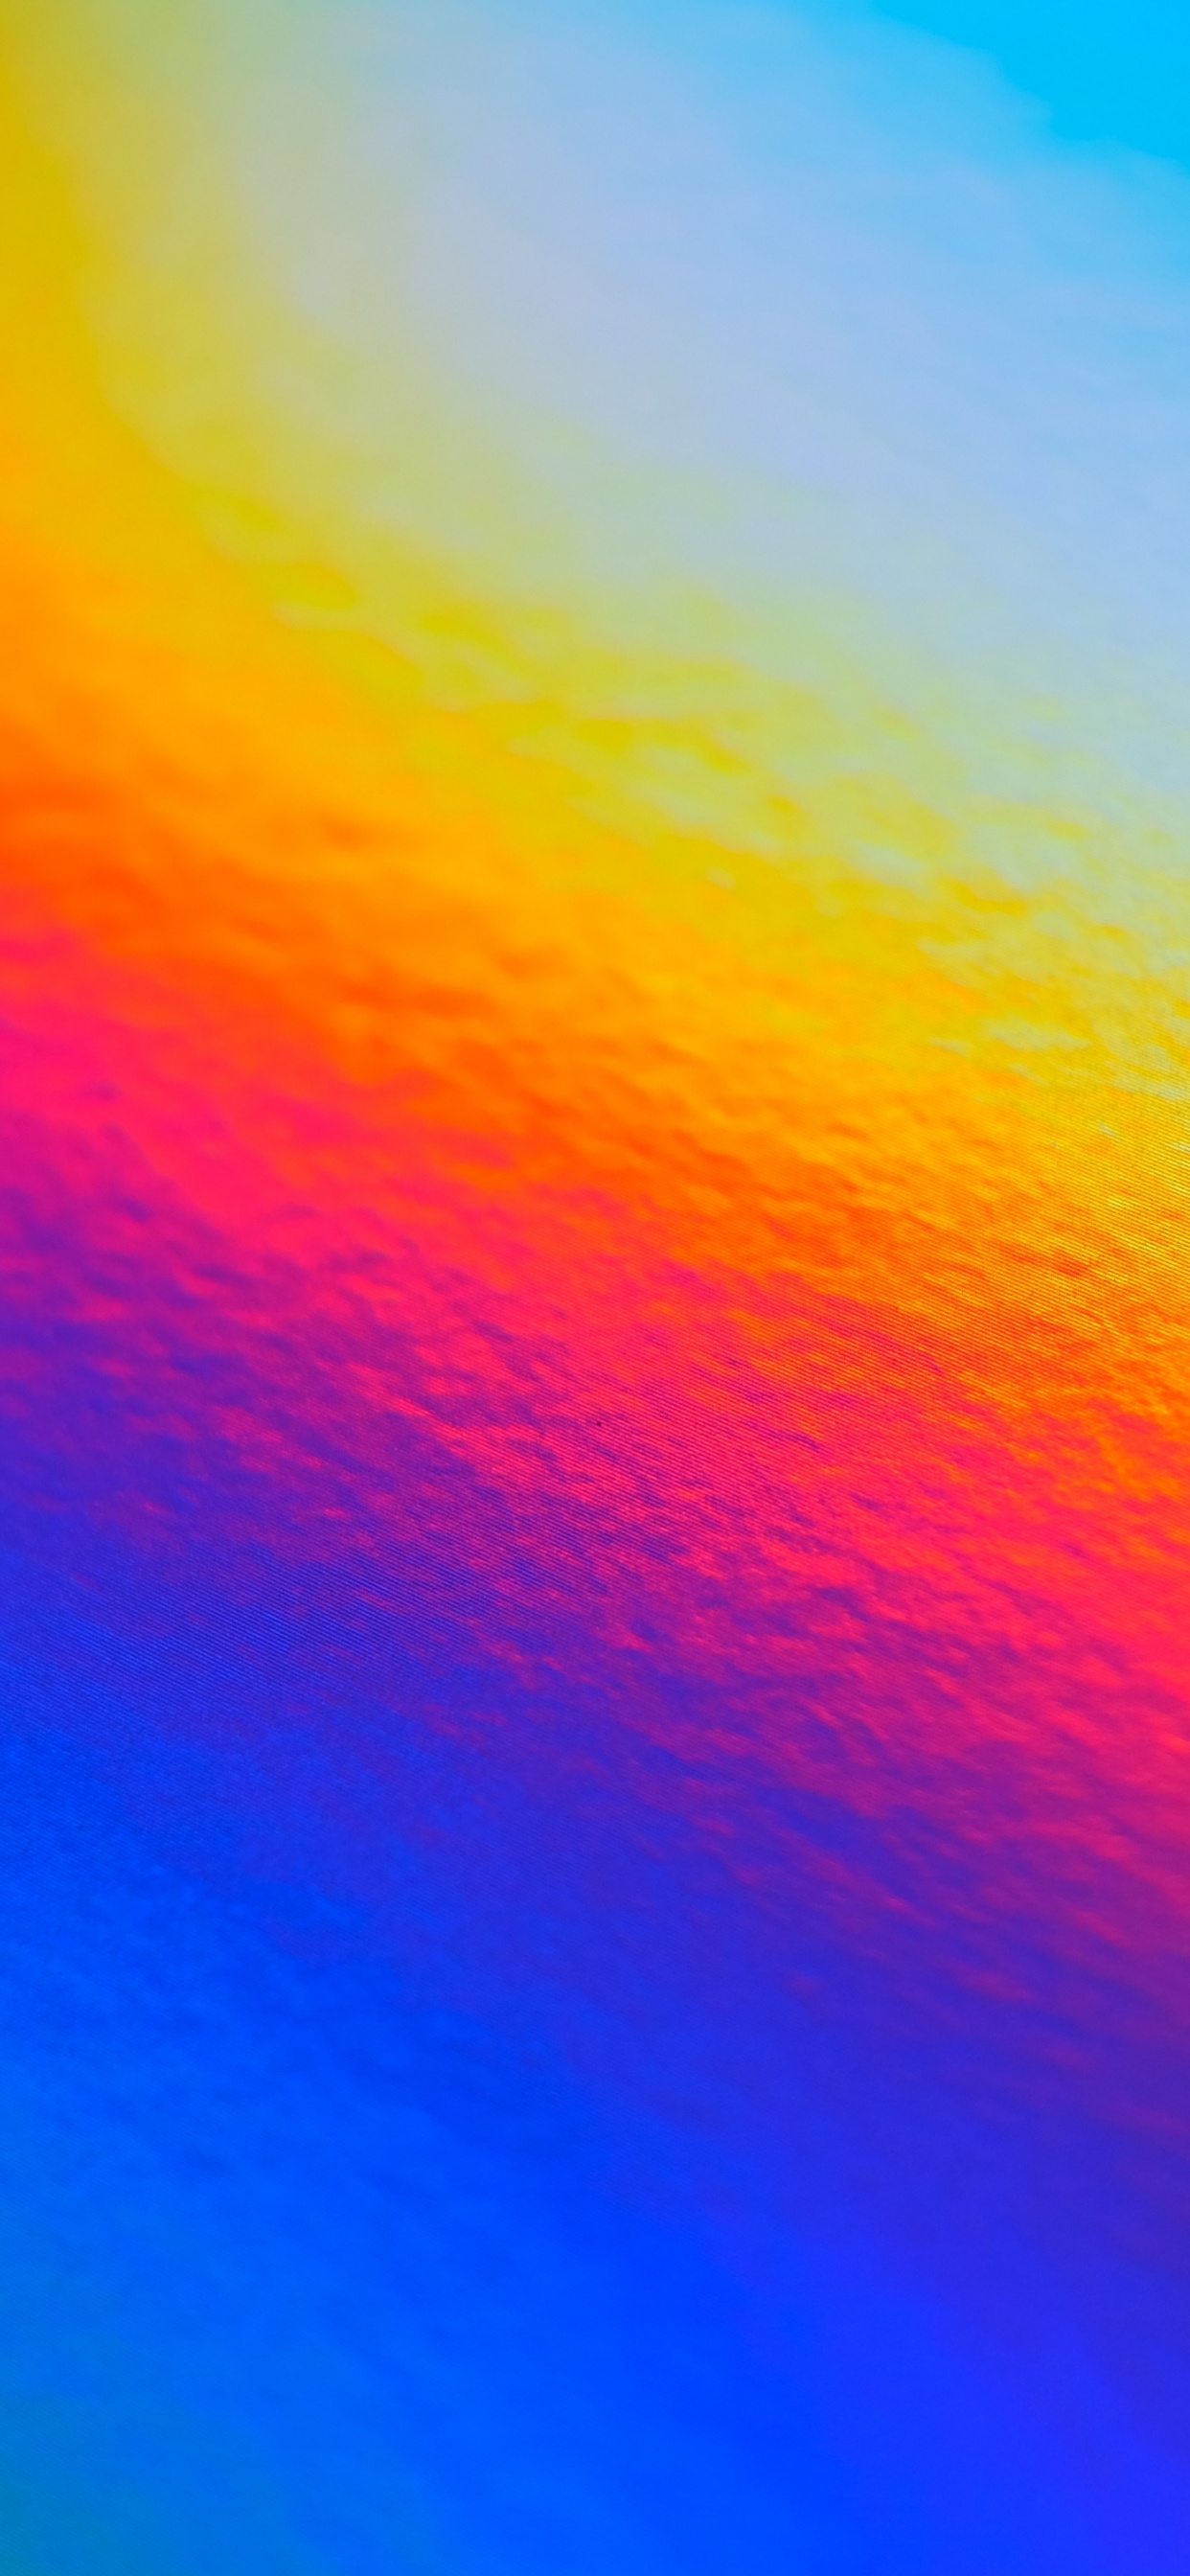 Orange and Blue Abstract Painting. Wallpaper in 1242x2688 Resolution